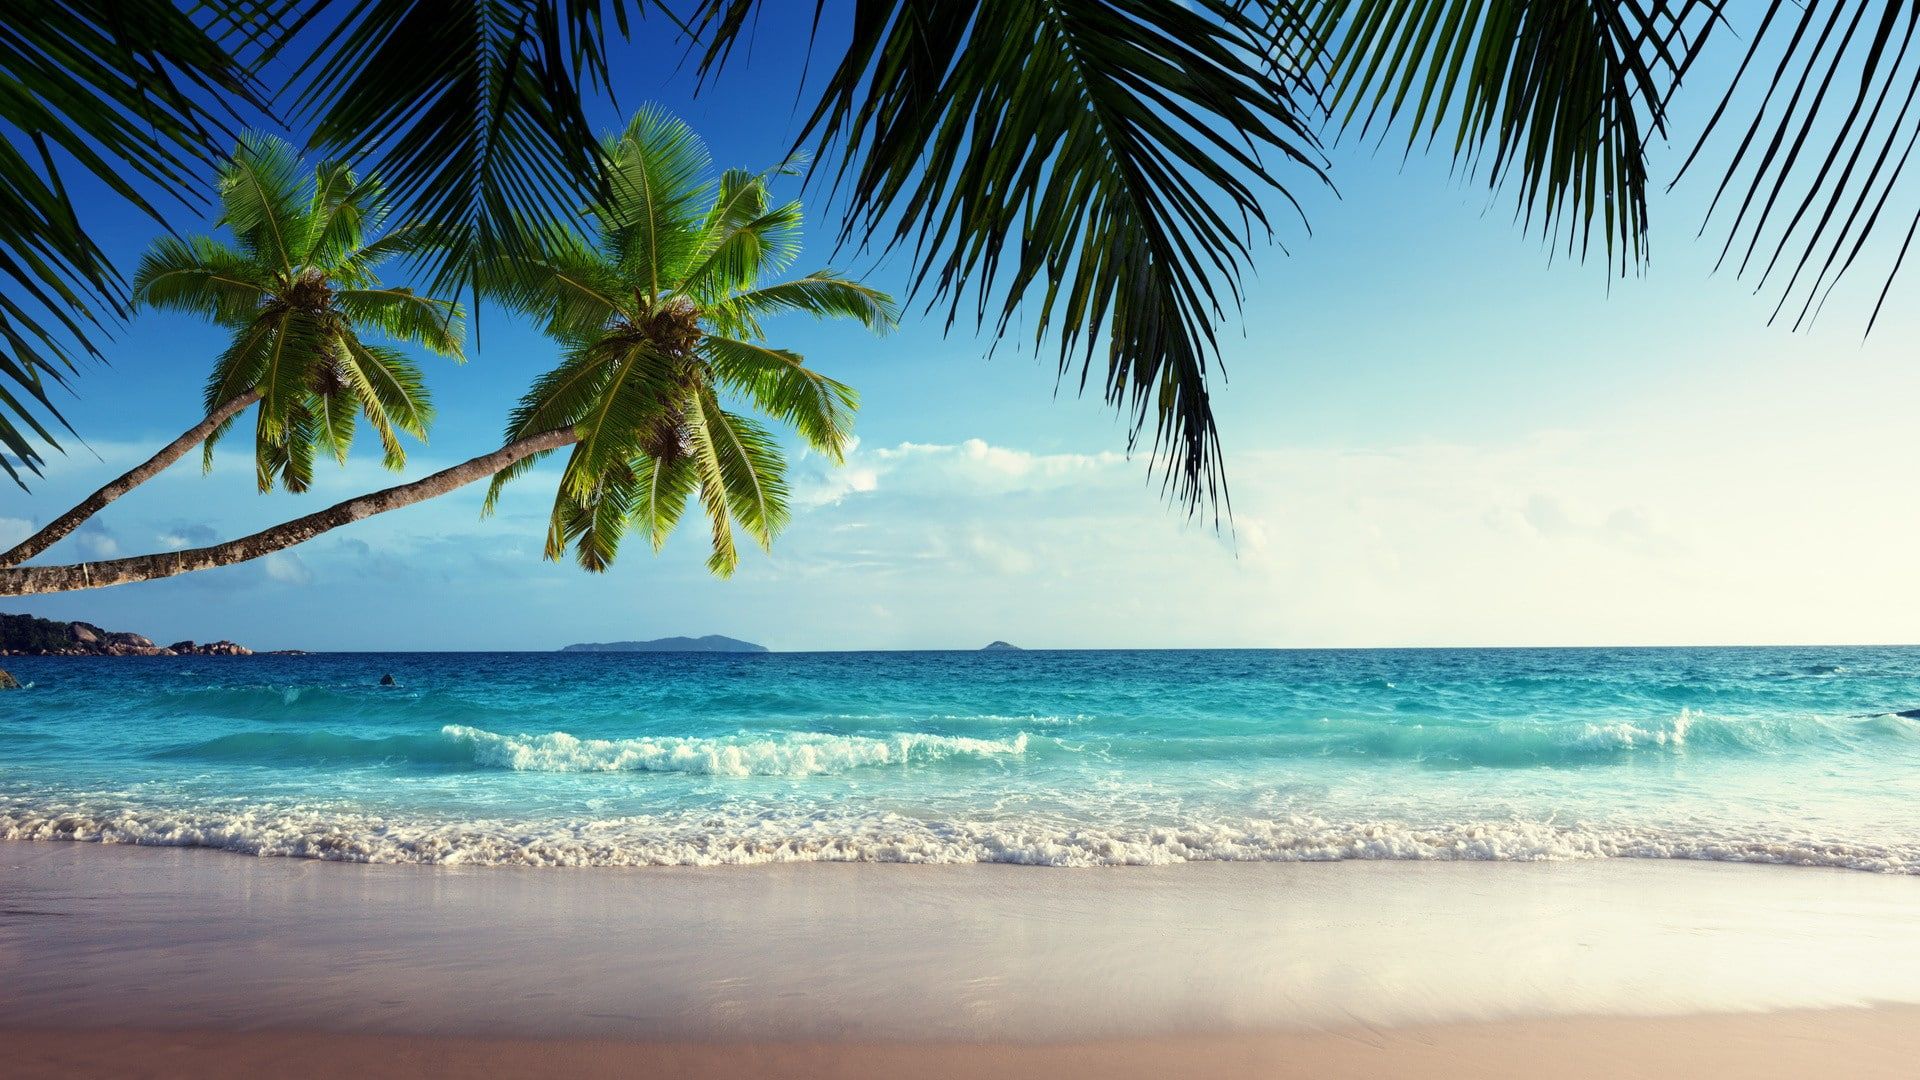 20 beautiful beach wallpapers for your desktop | beach, palm trees - Tropical